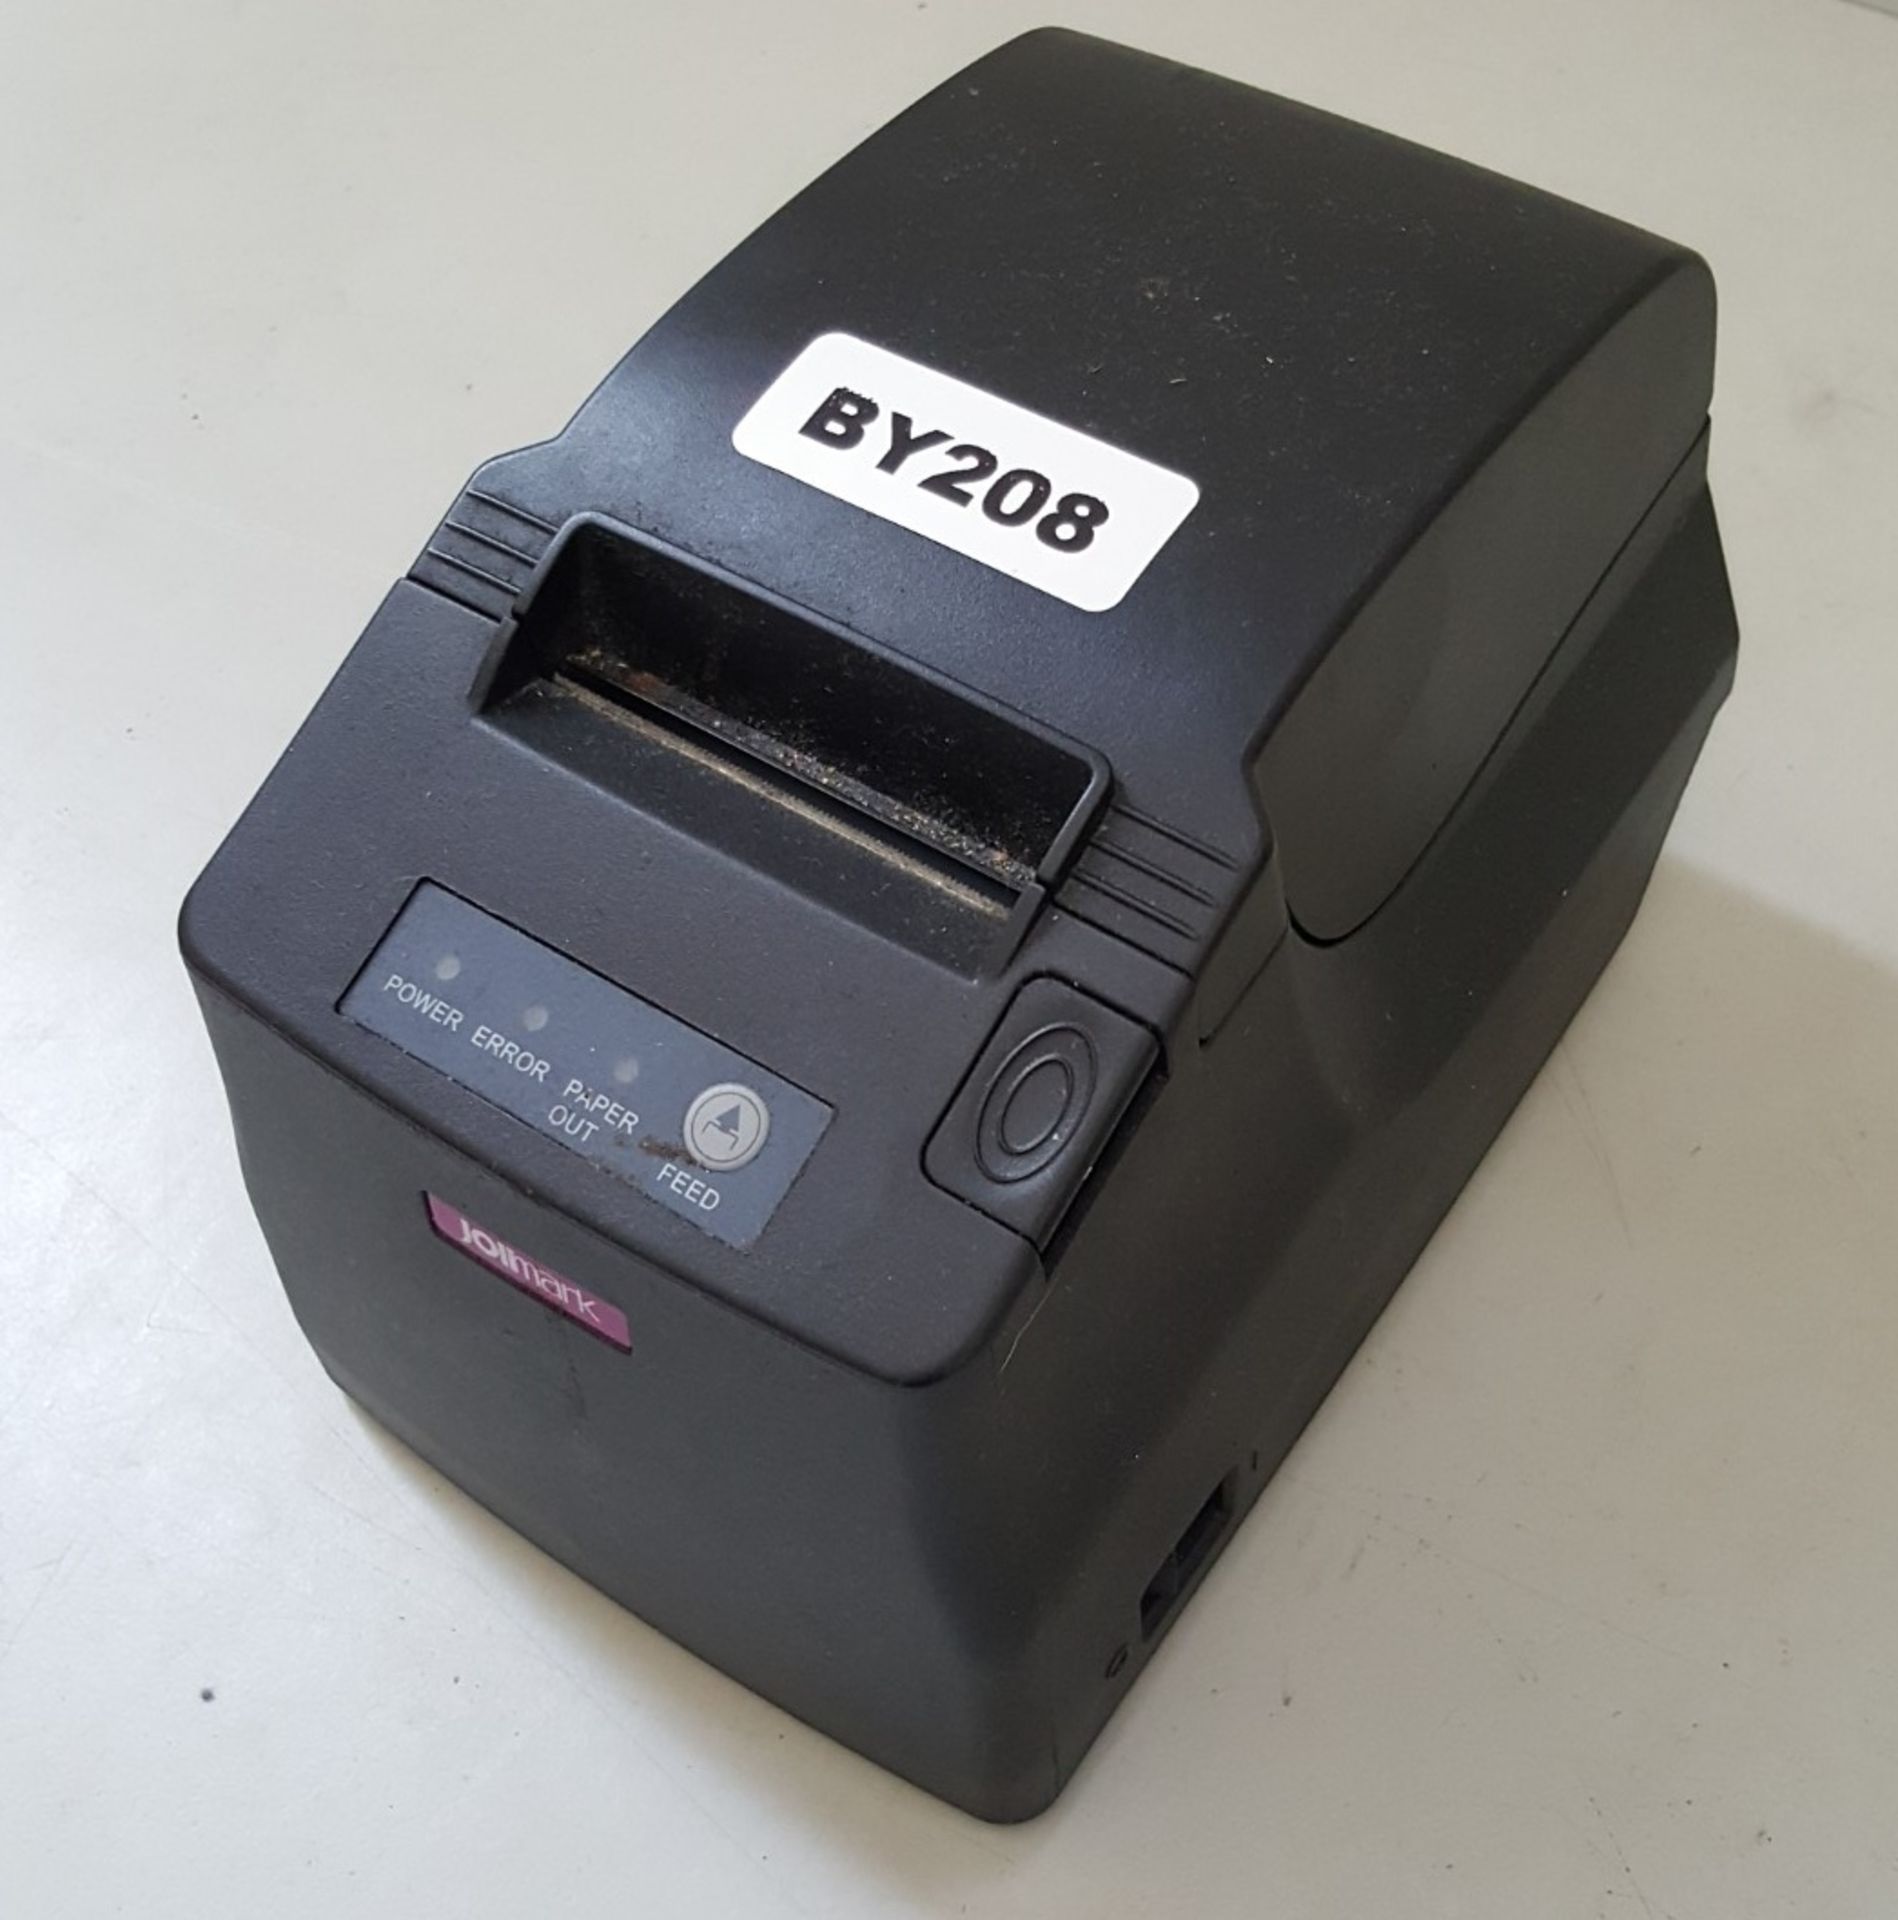 1 x Jolimark TP510 Thermal Printer With Bluetooth & USB interface - Ref BY208 - Image 2 of 4